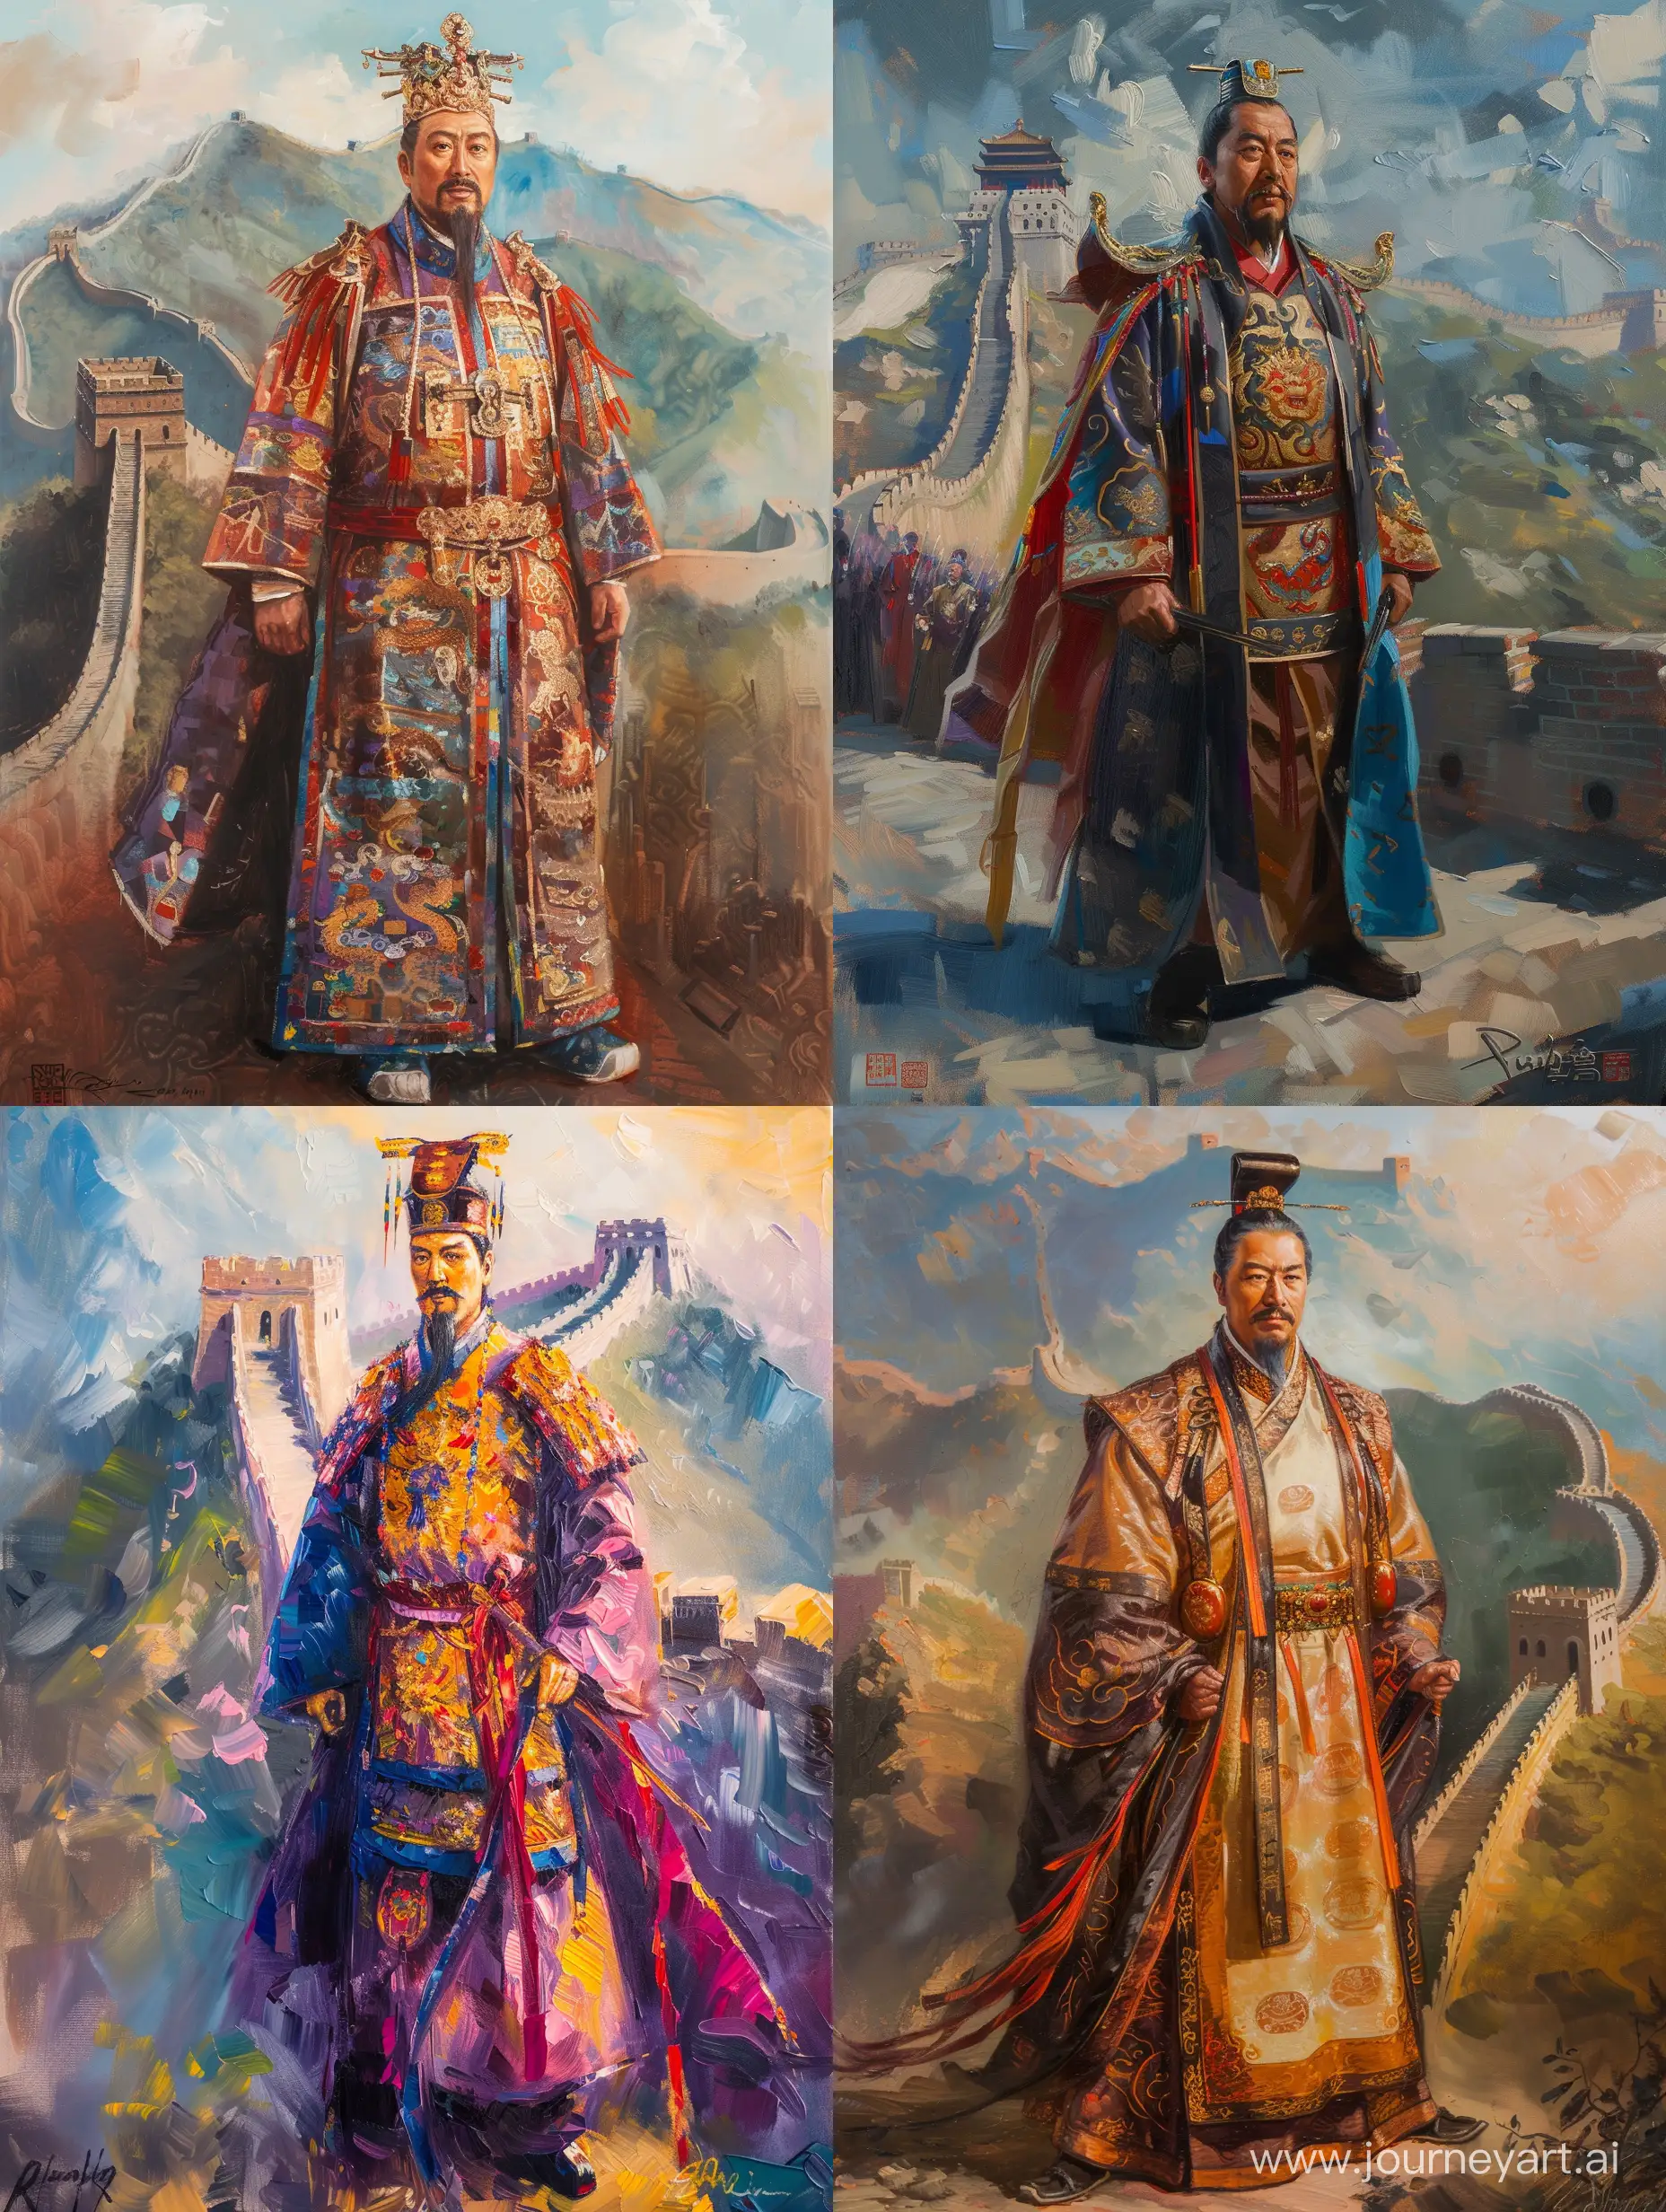 Majestic-Portrait-of-Emperor-Qin-Shi-Huang-Amidst-the-Great-Wall-of-China